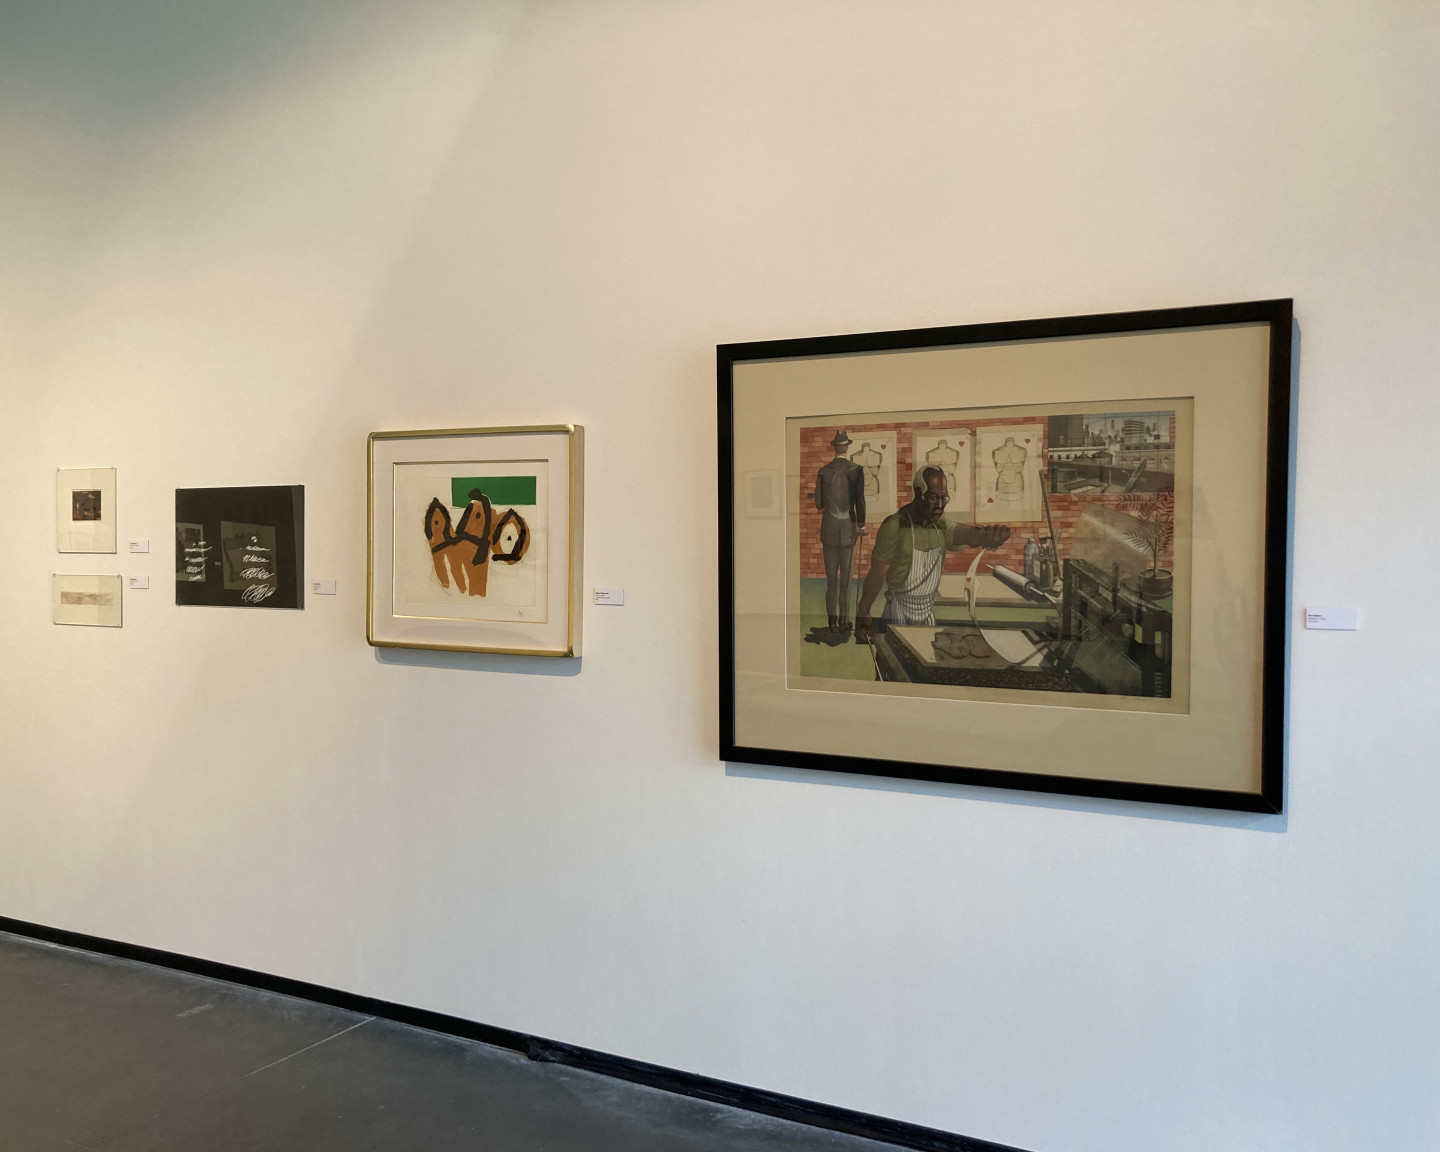 Prominently featured on the right is the print the print “Blackburn” by Ron Adams with a print to its left by Robert Motherwell and another by Cy Twombly.